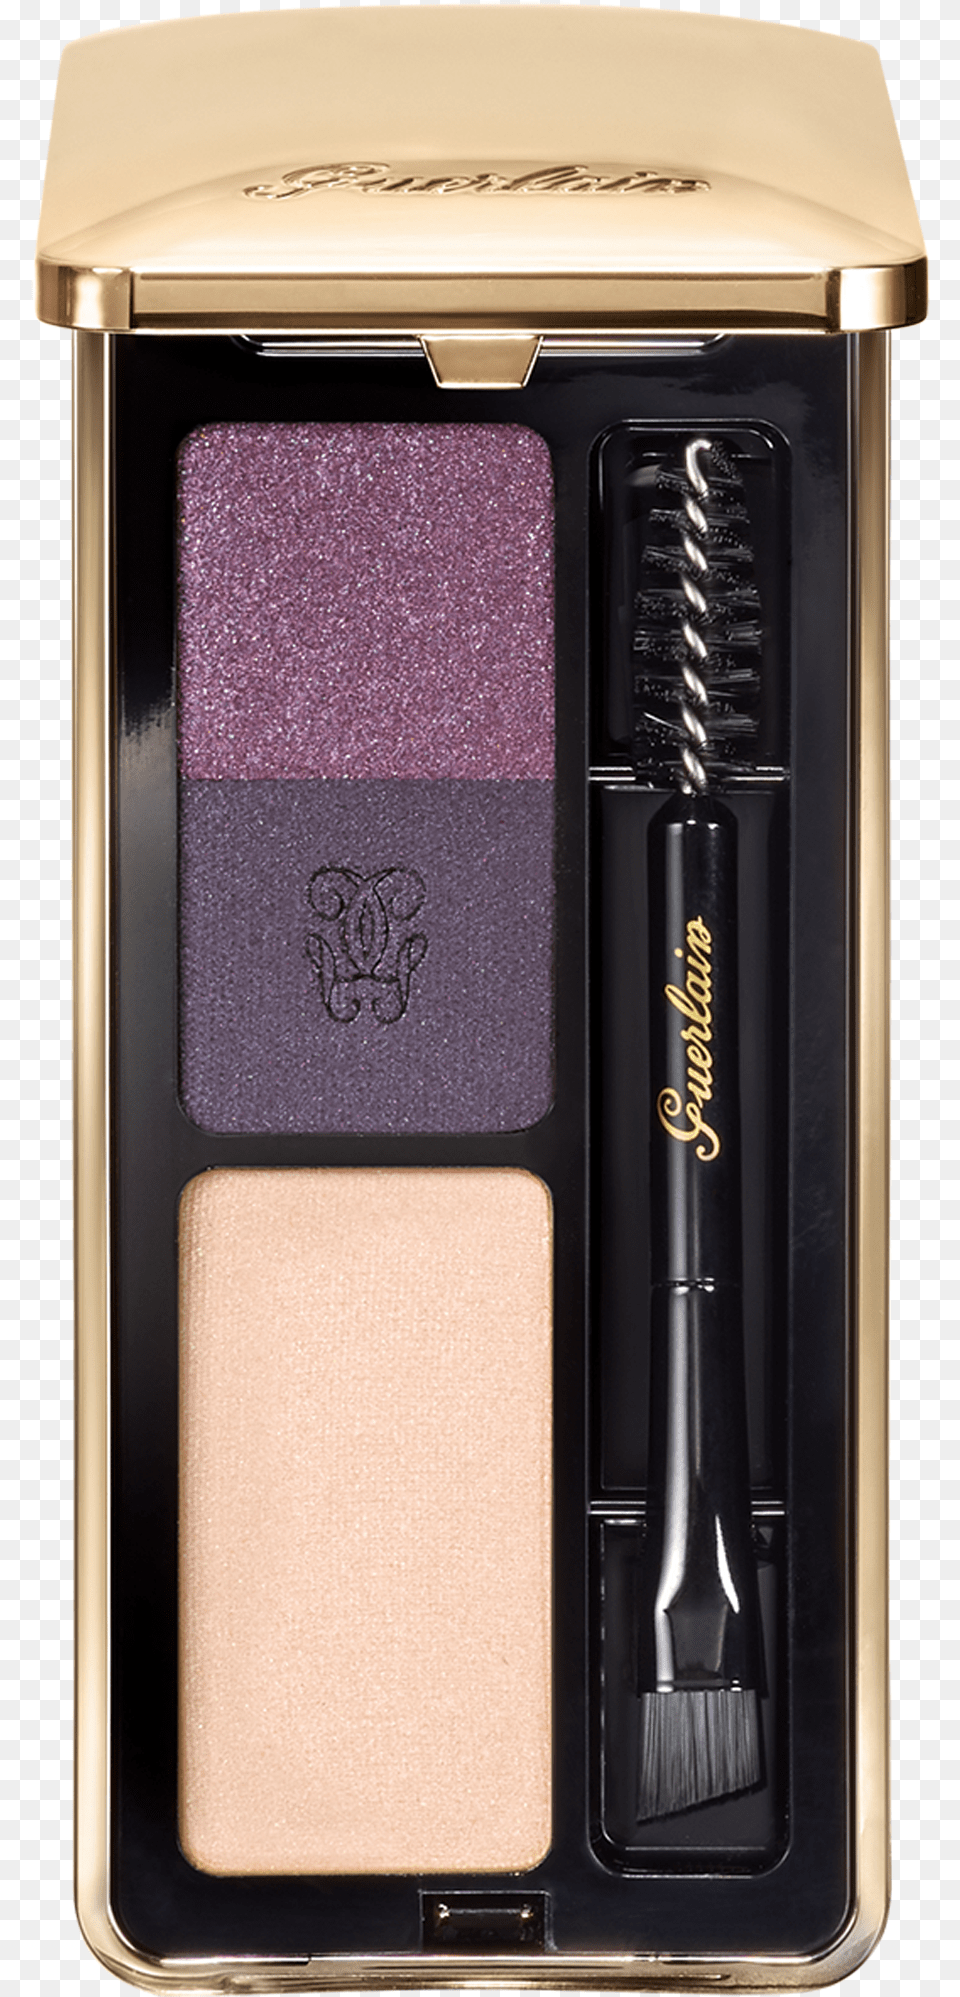 Guerlain Eyeshadow Palette 2019, Electronics, Mobile Phone, Phone, Cosmetics Free Png Download